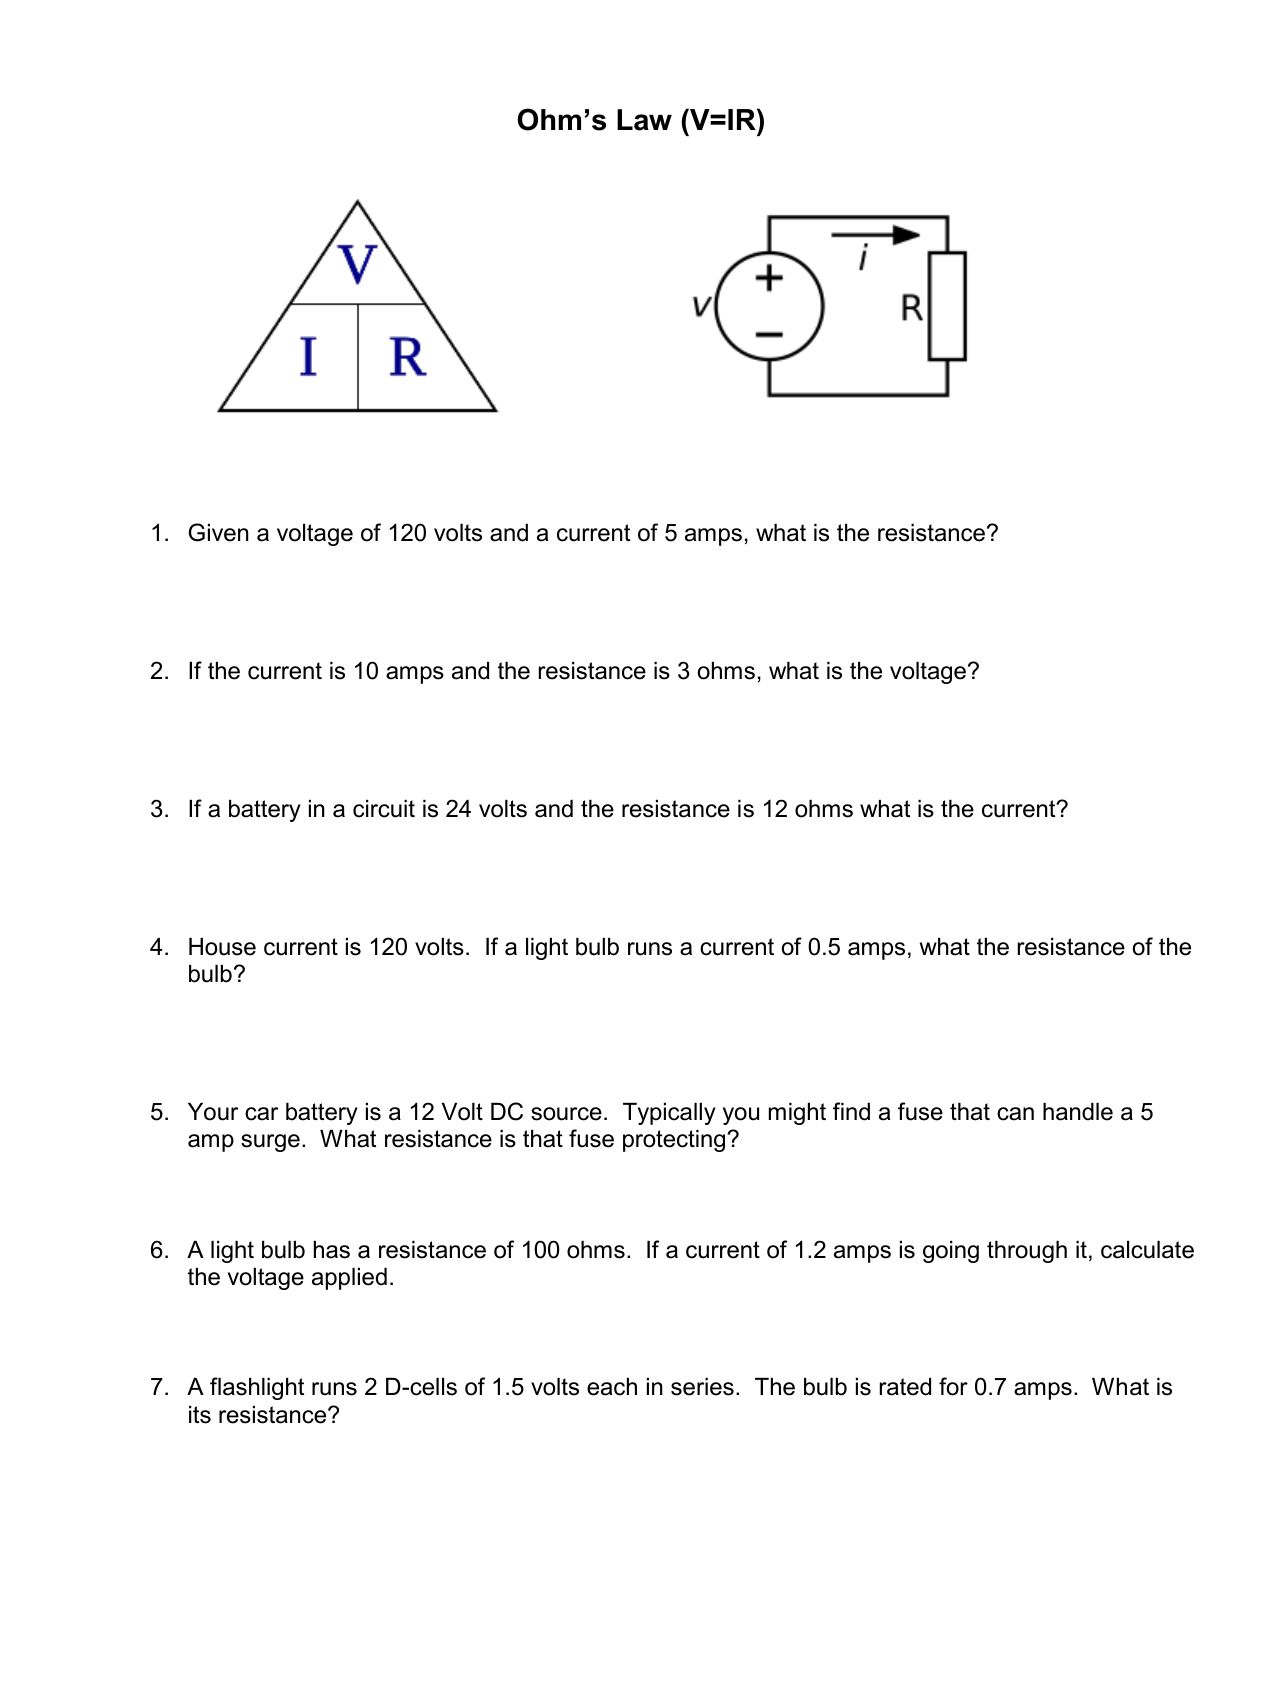 ohm's law assignment